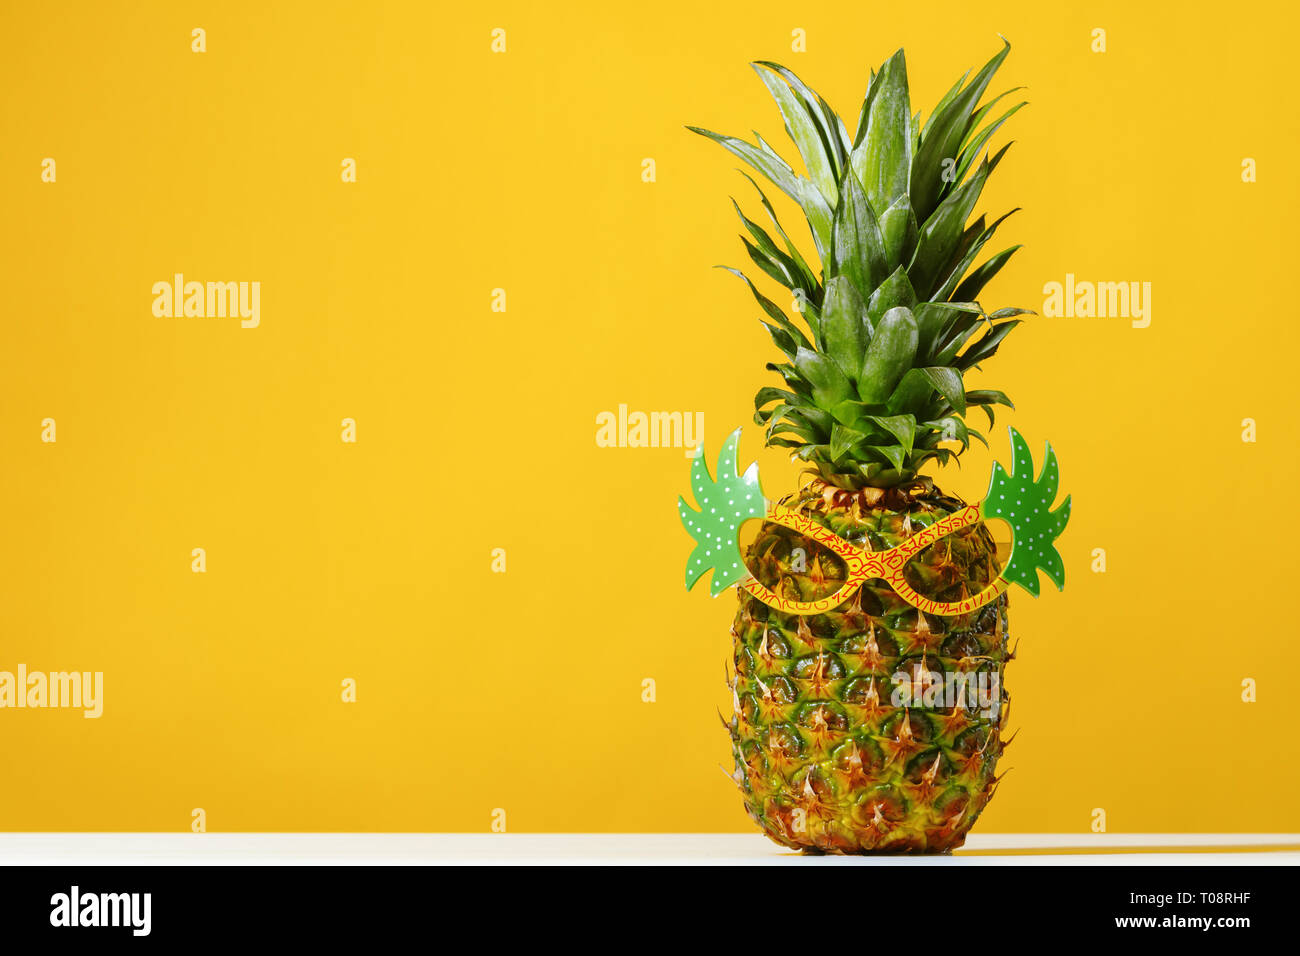 Pineapple wears sunglasses on a yellow background Stock Photo